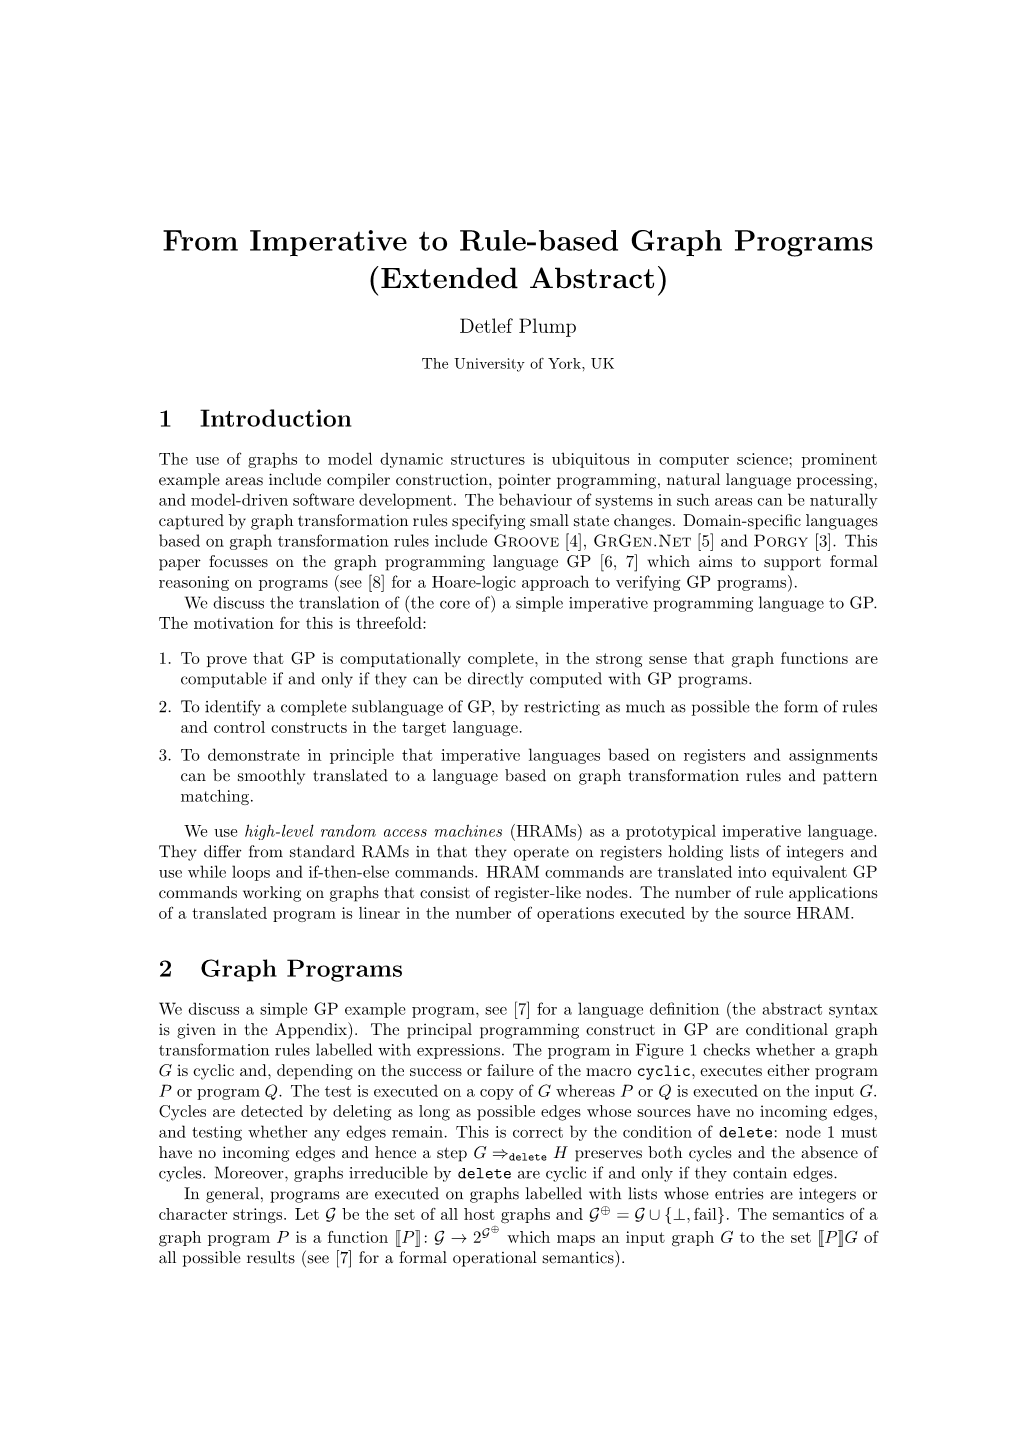 From Imperative to Rule-Based Graph Programs (Extended Abstract)